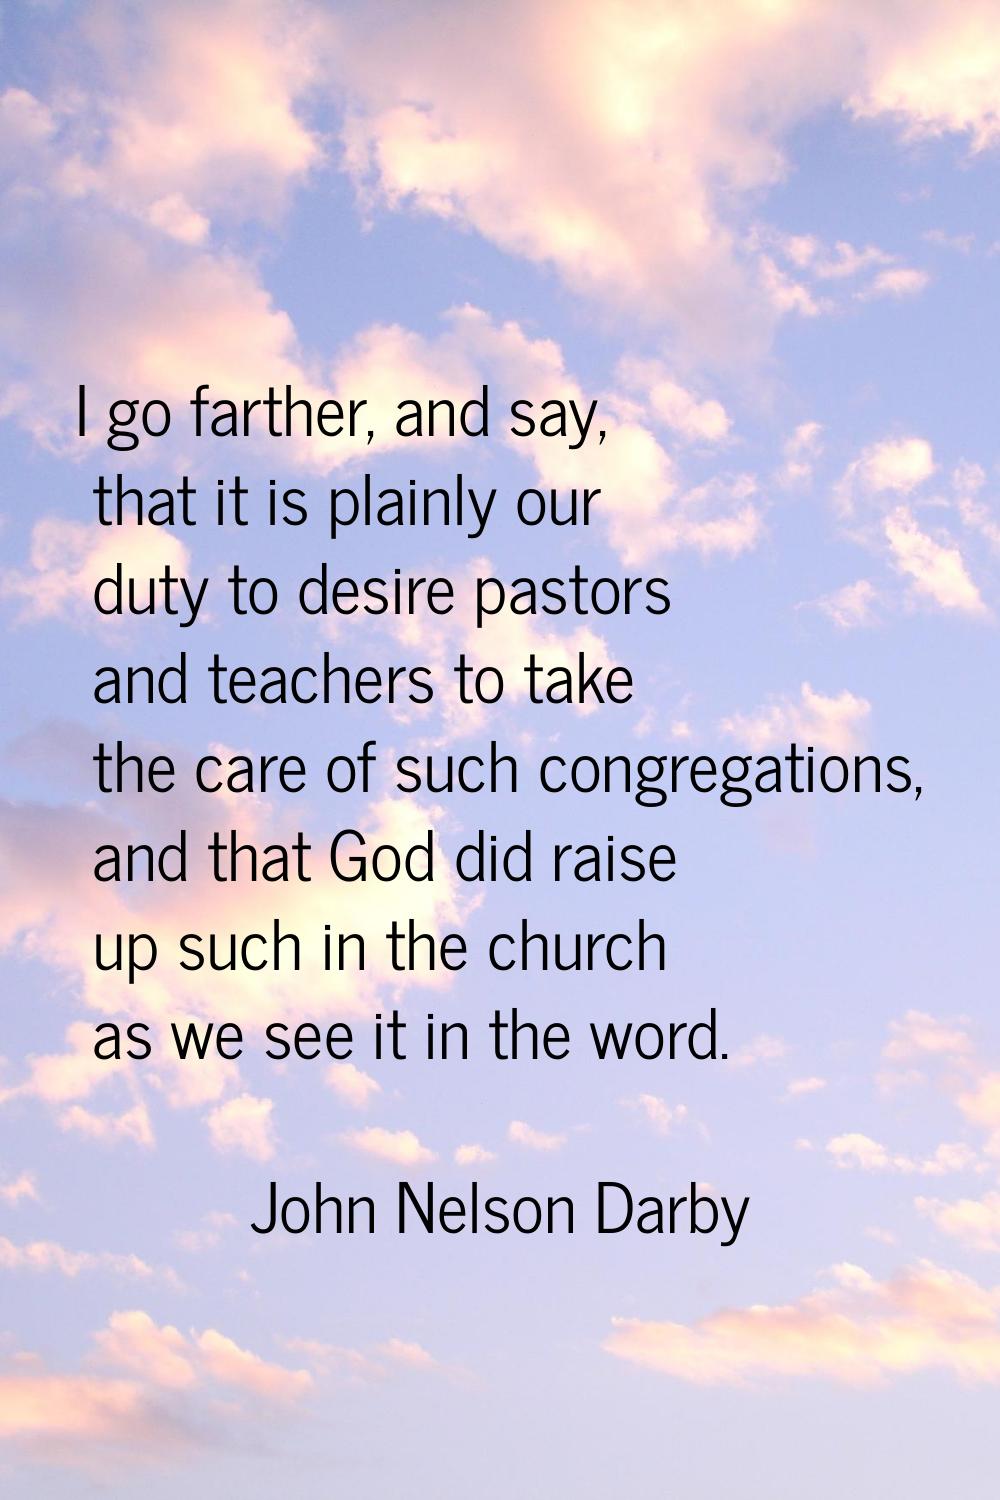 I go farther, and say, that it is plainly our duty to desire pastors and teachers to take the care 